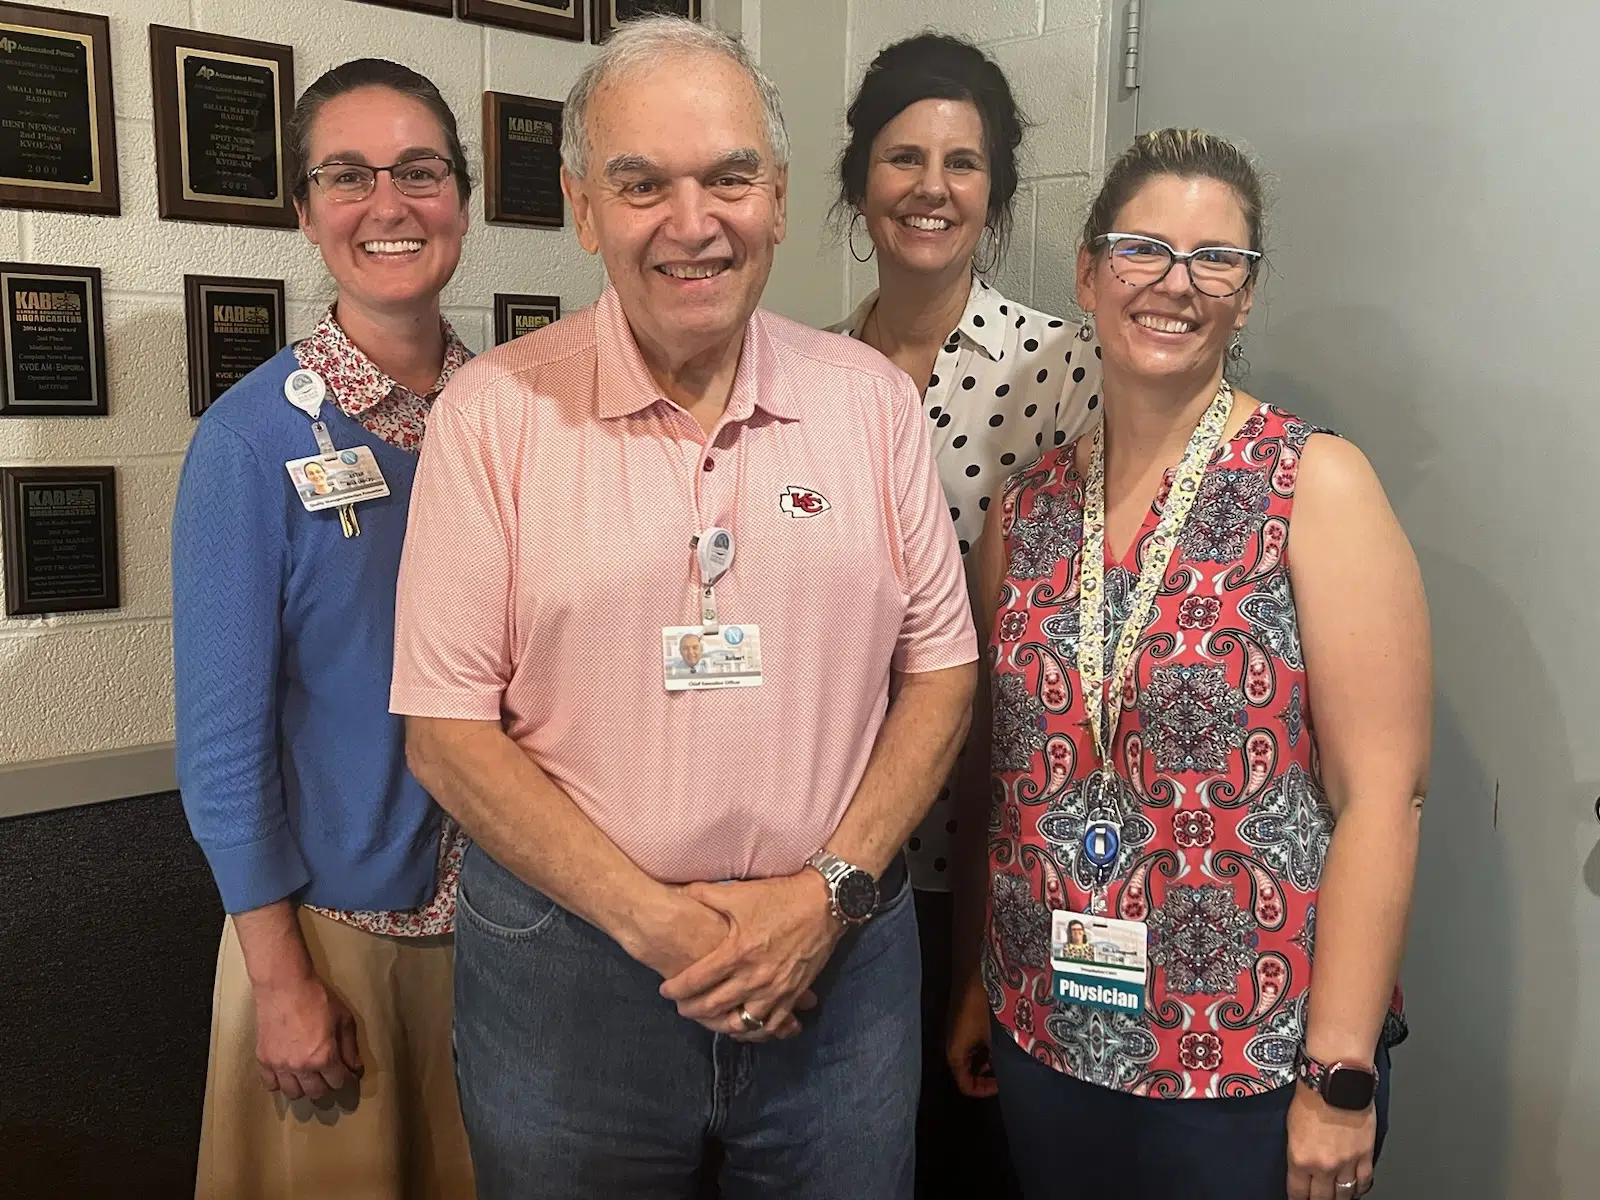 CORONAVIRUS: Newman Regional Health administrators express gratitude for community support as pandemic emergency officially ends